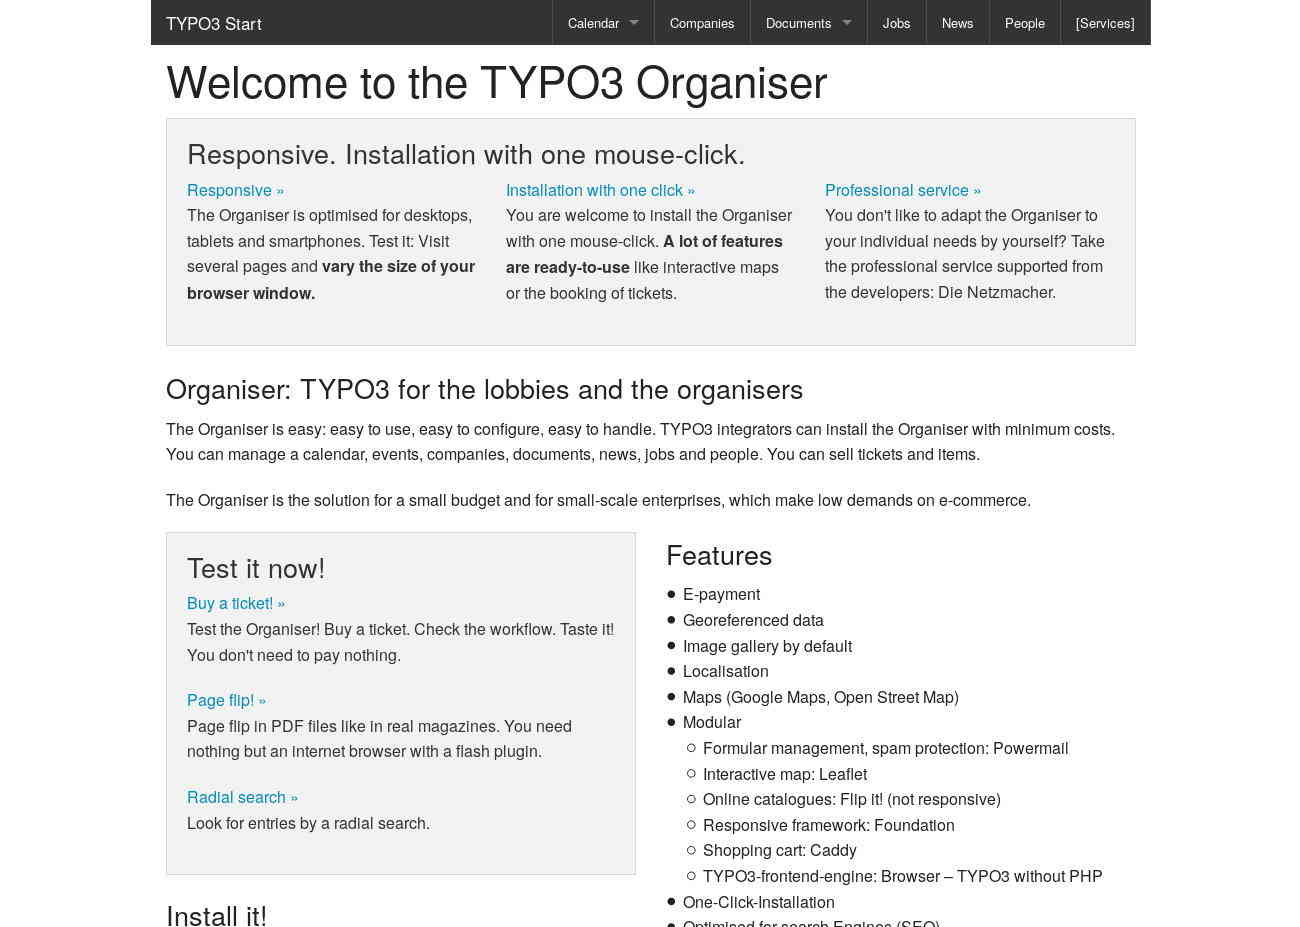 Start TYPO3 Responsive: without the +Customer extension